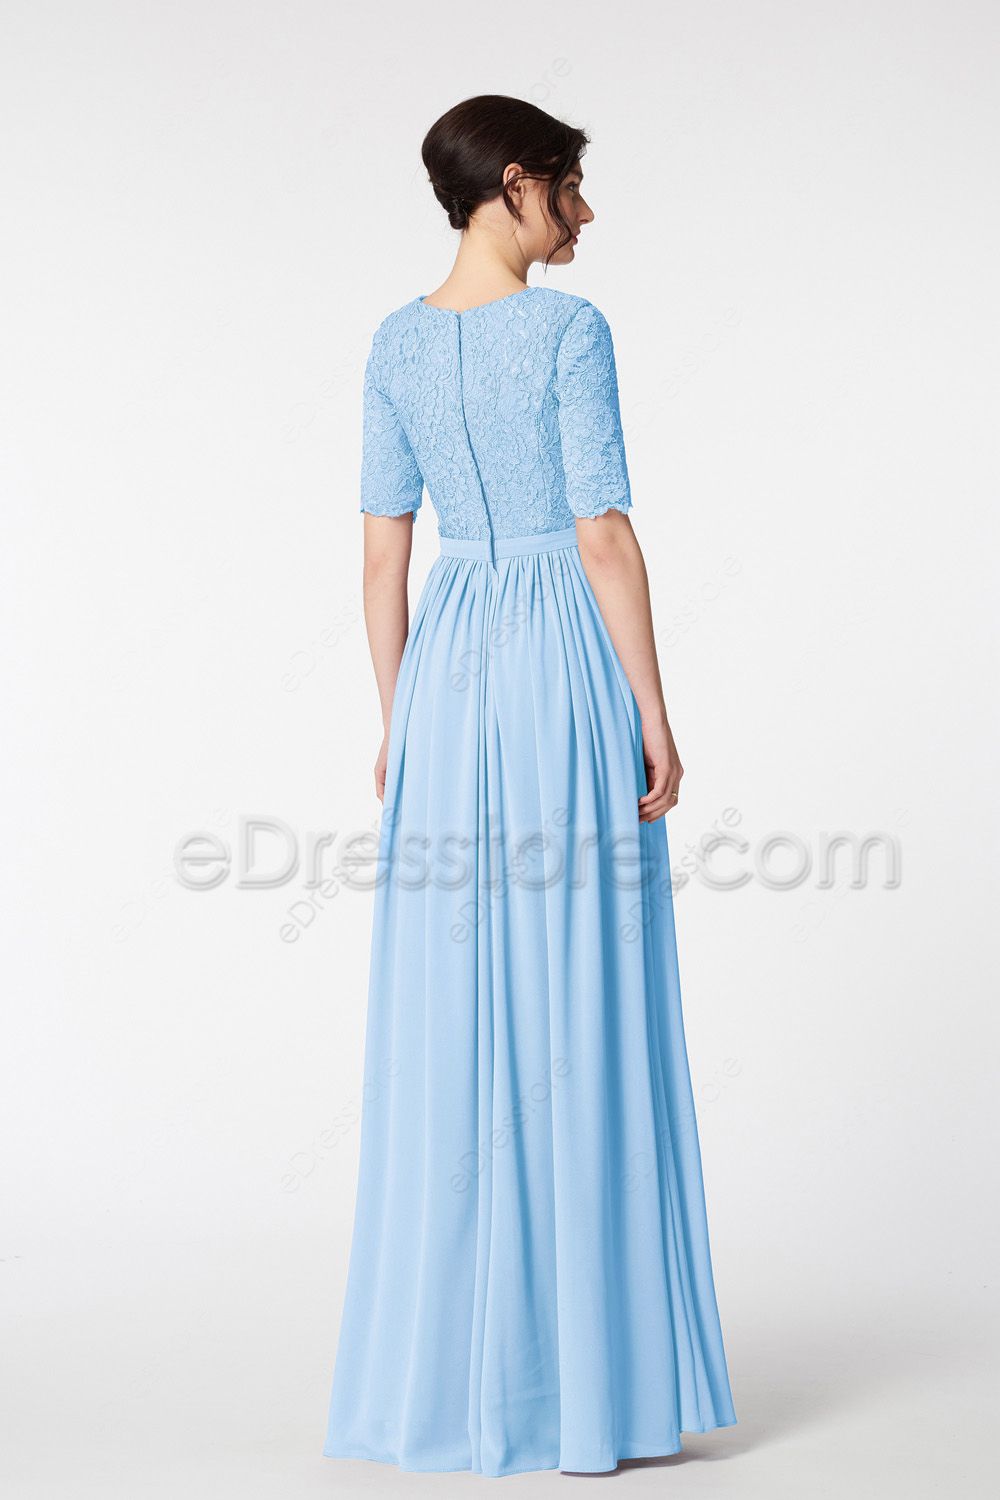 Modest LDS Lace Baby Blue Bridesmaid Dresses Elbow Sleeves | eDresstore